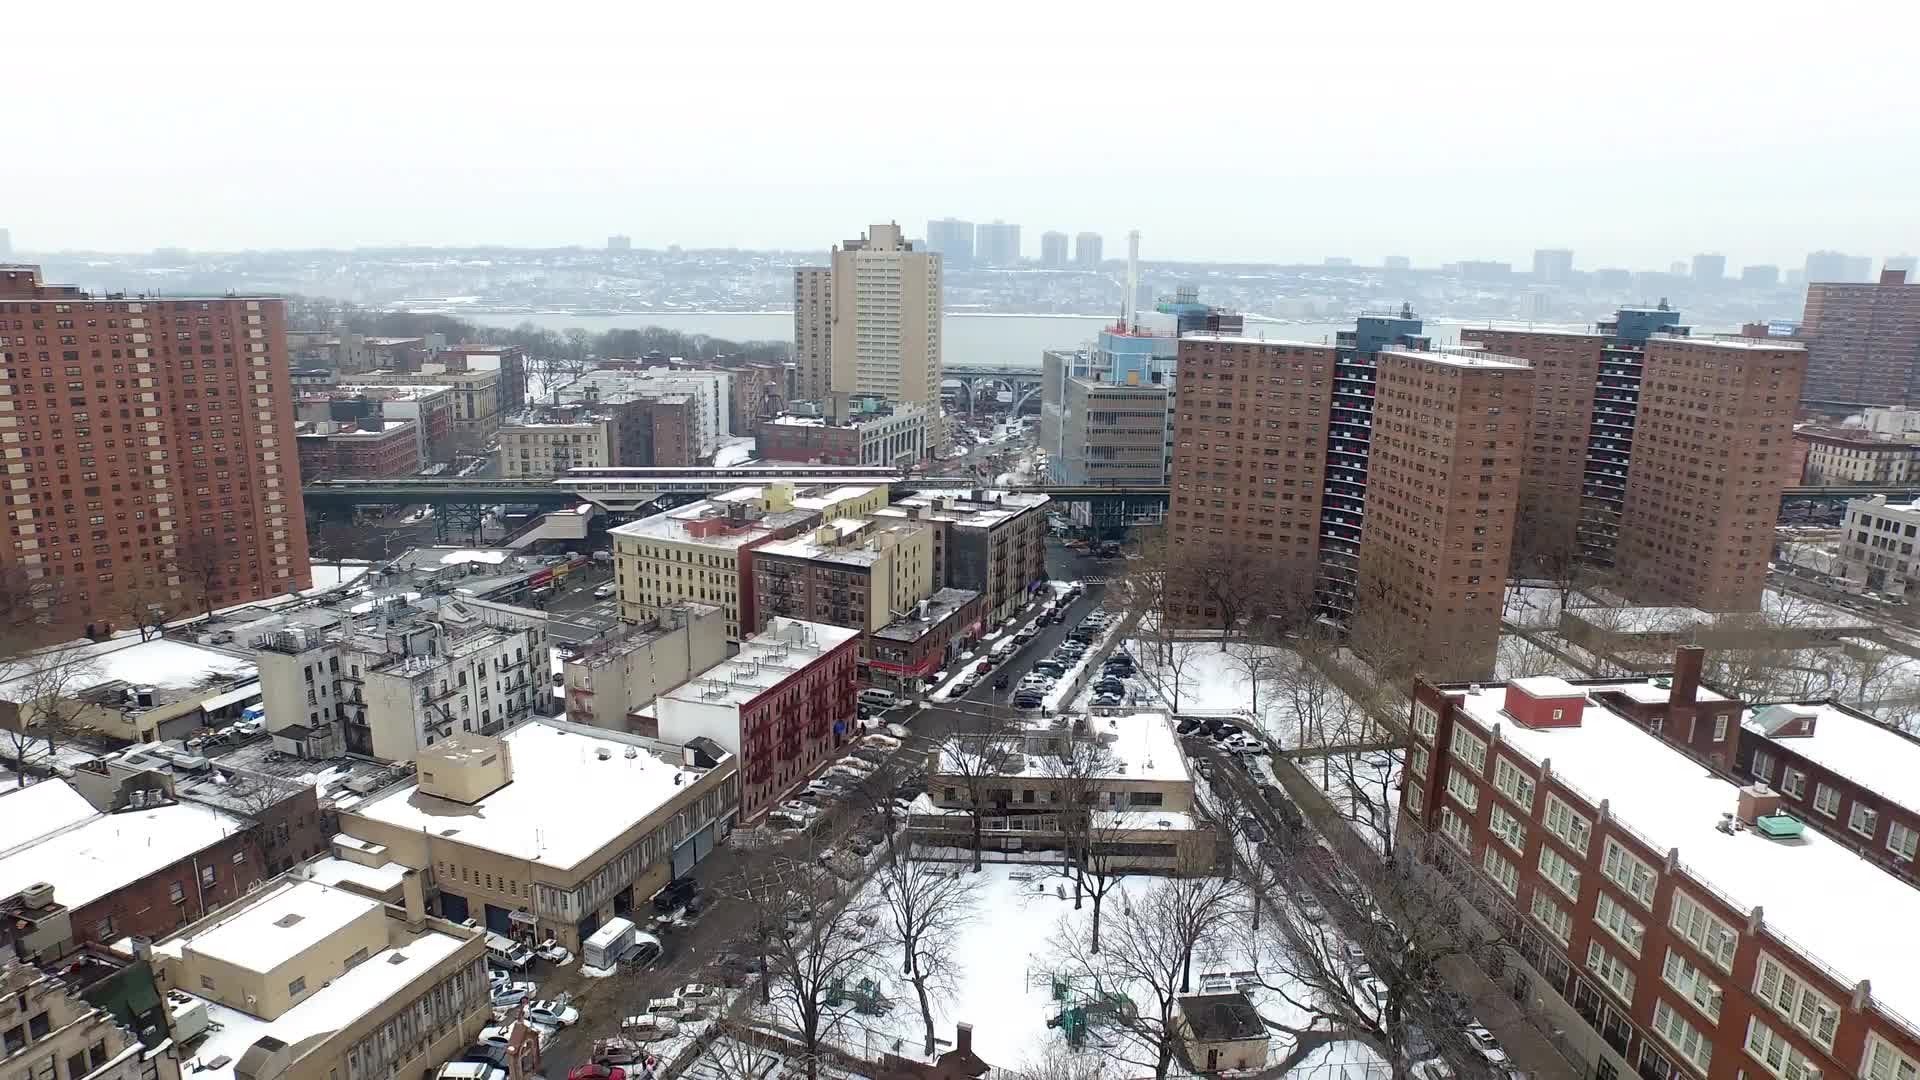 Lower East Side housing projects aerial pulling back over red brick buildings 4K NYC